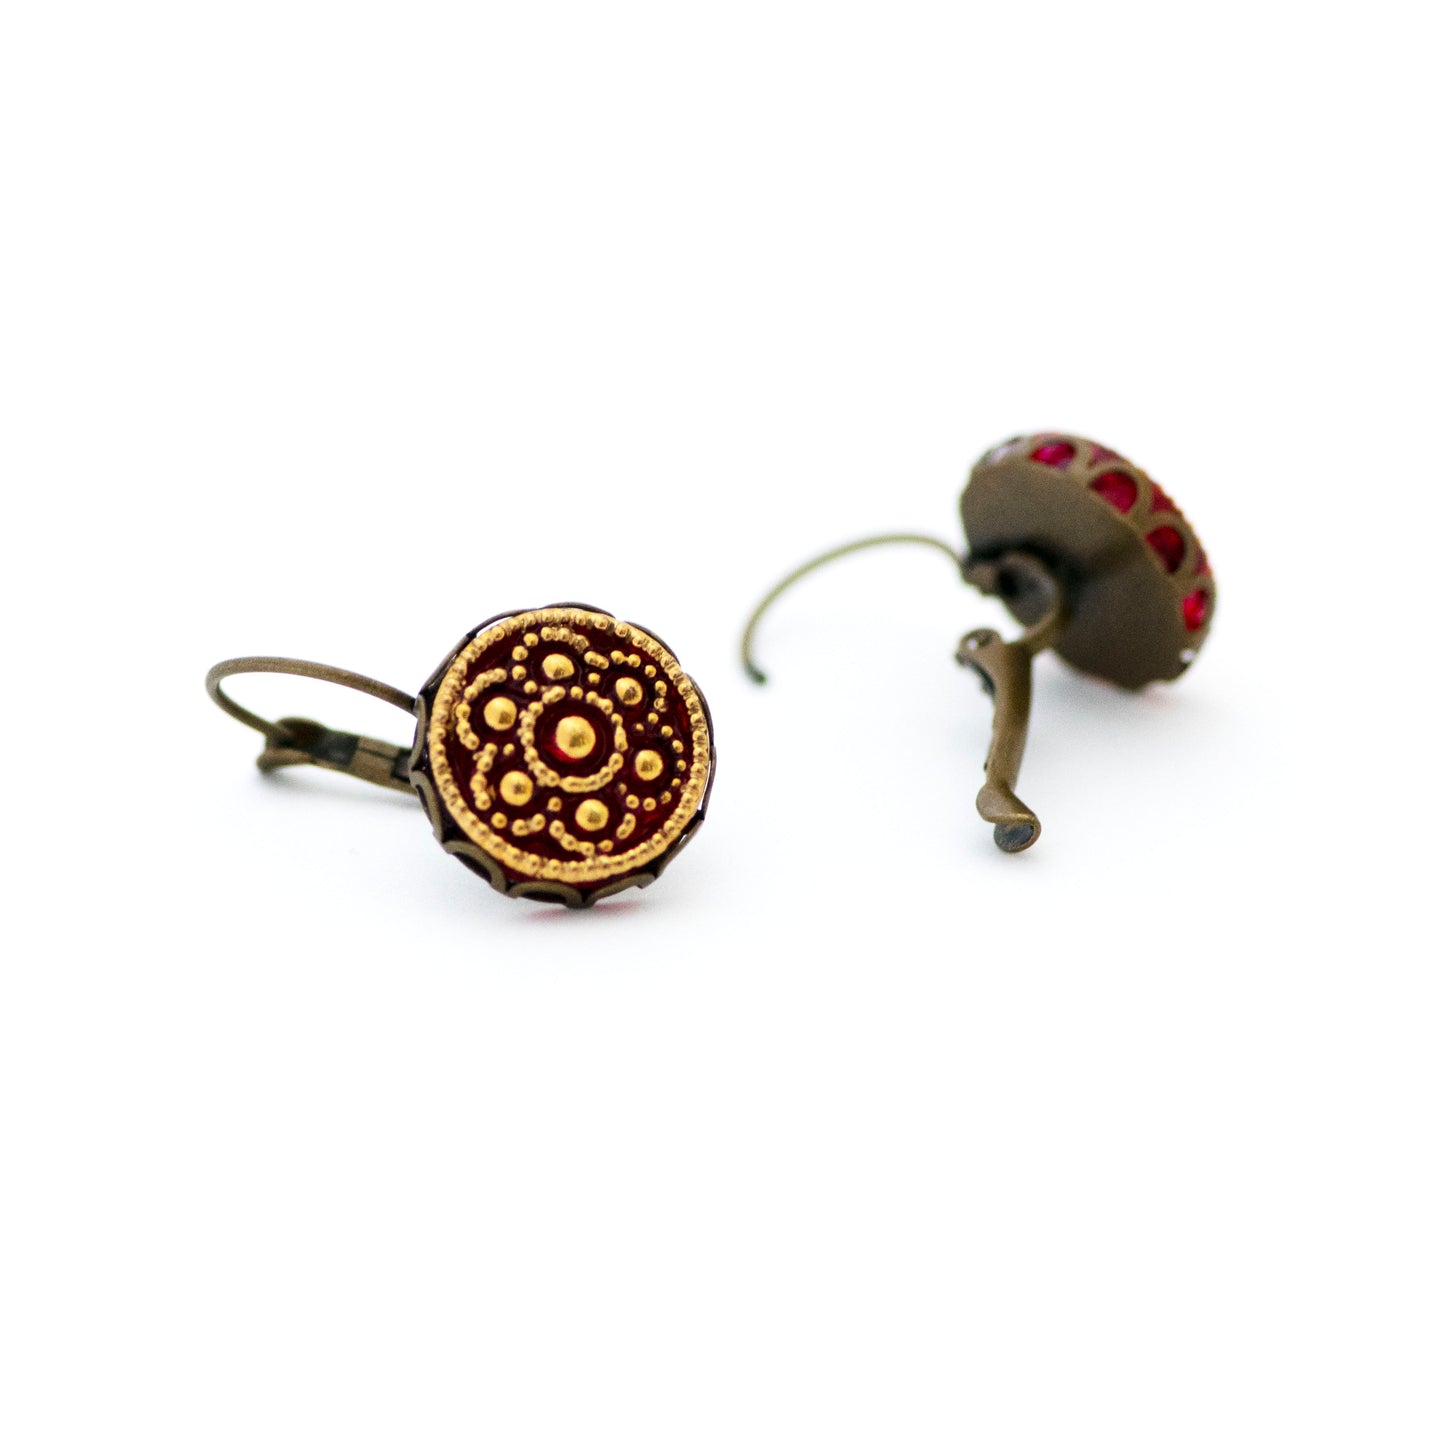 Red and gold circles flower Czech glass buttons. Leverback earrings.